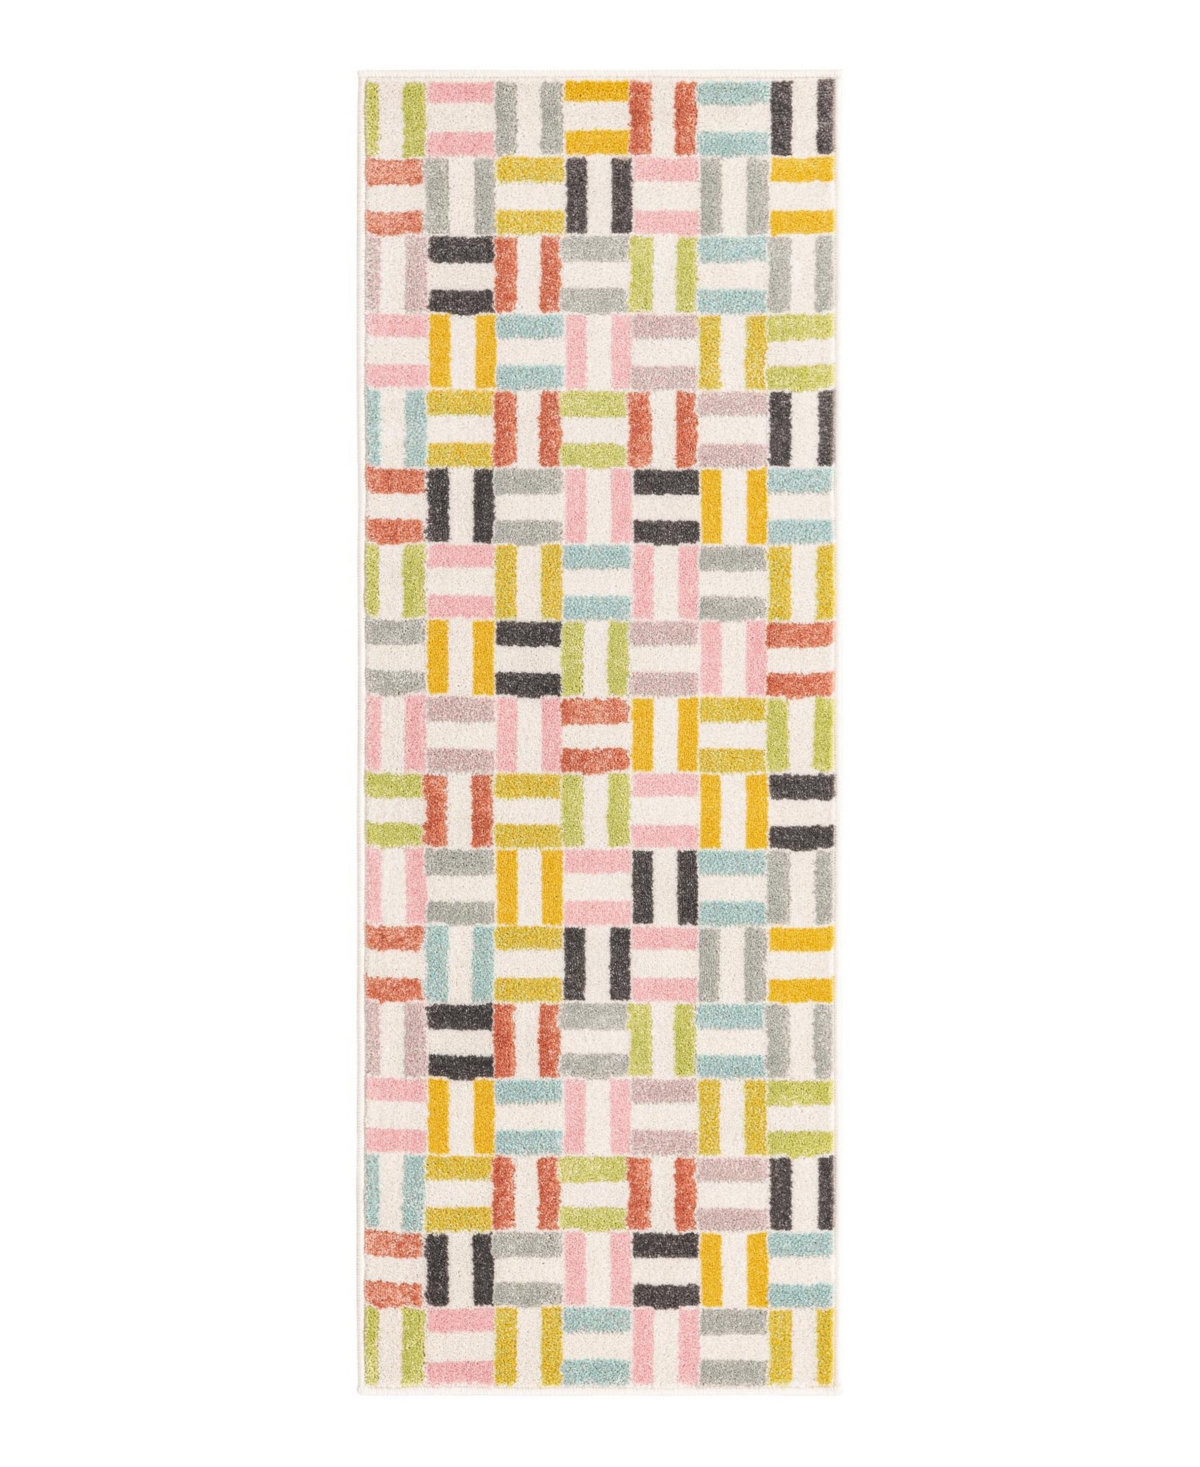 Bayshore Home Campy Kids Chicklets 2'2" X 6' Runner Area Rug In Multi